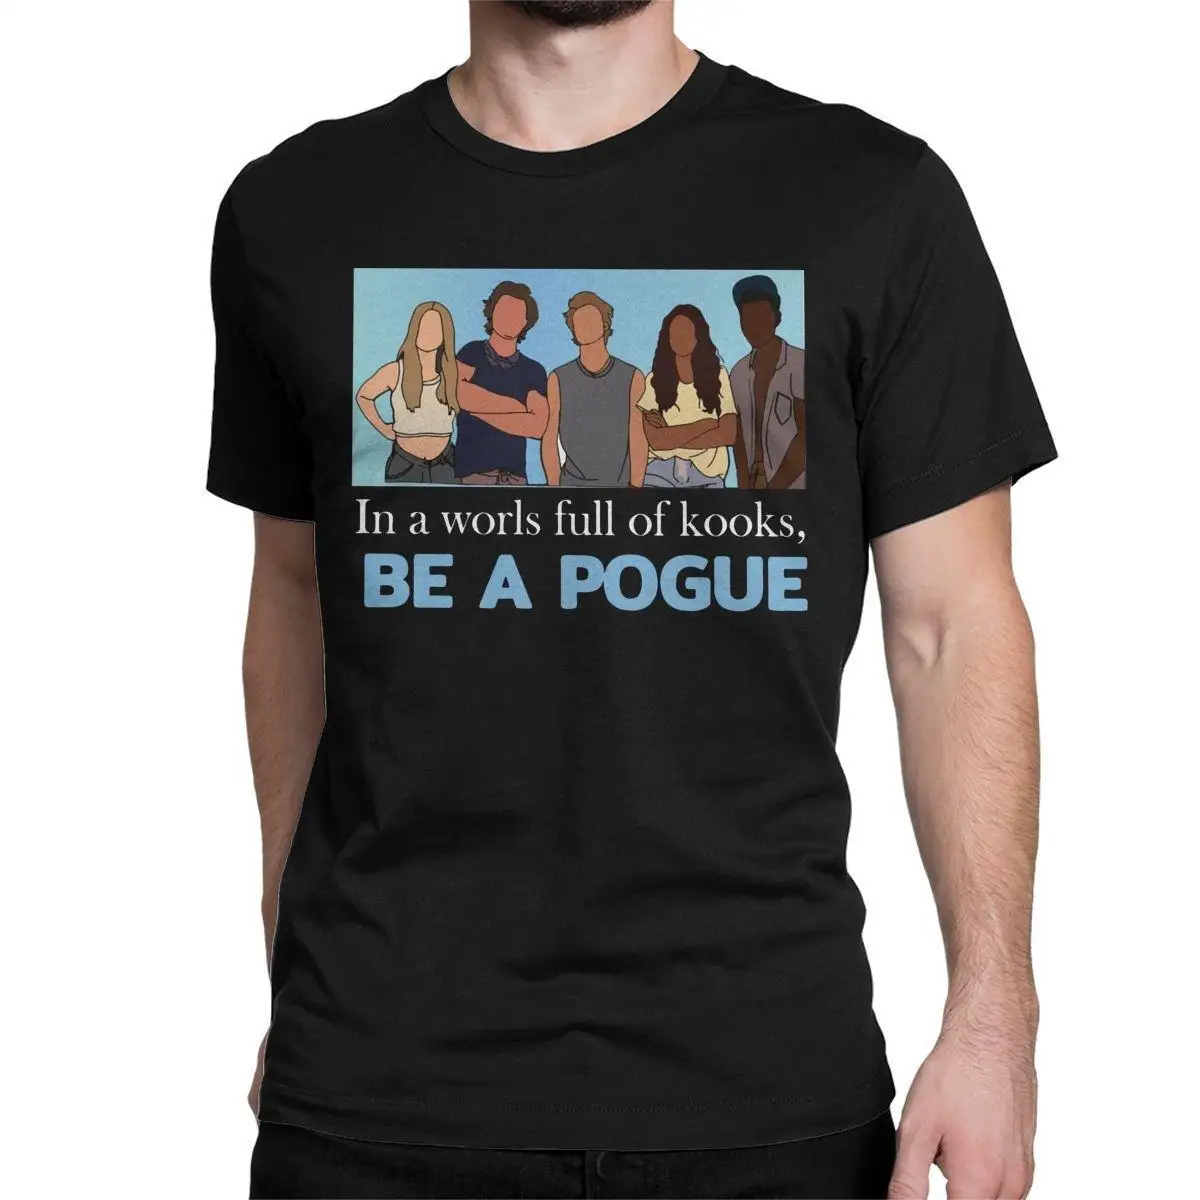 Be A Pogue Outer Banks T Shirts Men's 100% Cotton Vintage T-Shirt Round Collar TV Show Tees Short Sleeve Tops Plus Size